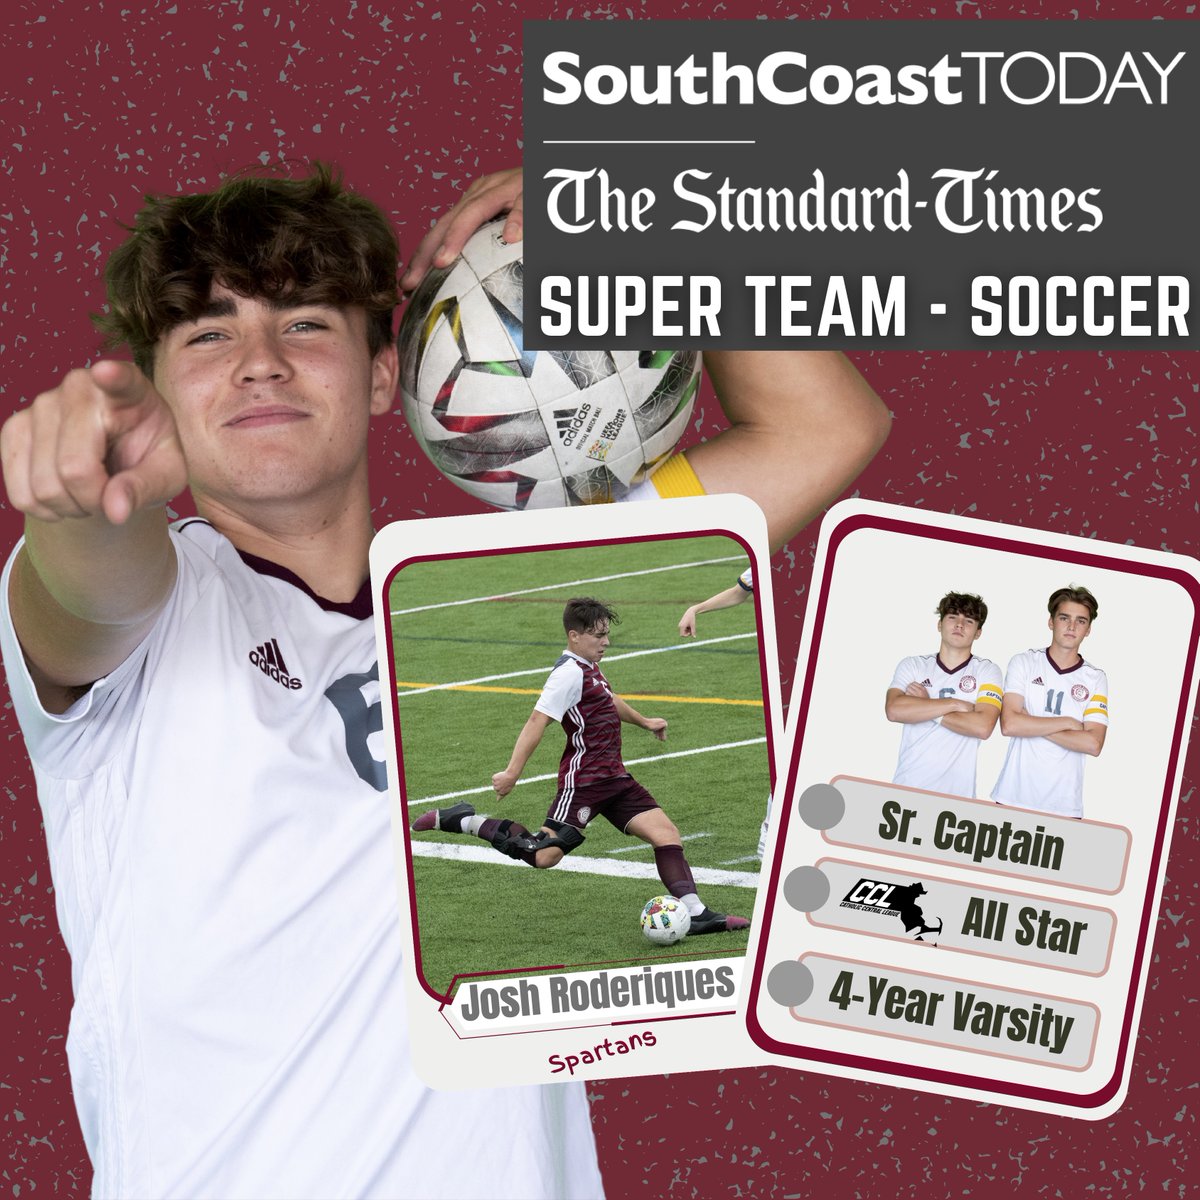 Congratulations to Sr. Josh Roderiques on being named to the Standard Times Super Team for Boys Soccer! “A true team player and talented midfielder, Roderiques did all the little things that don't show up in the box score' Congrats Josh! @SC_Varsity